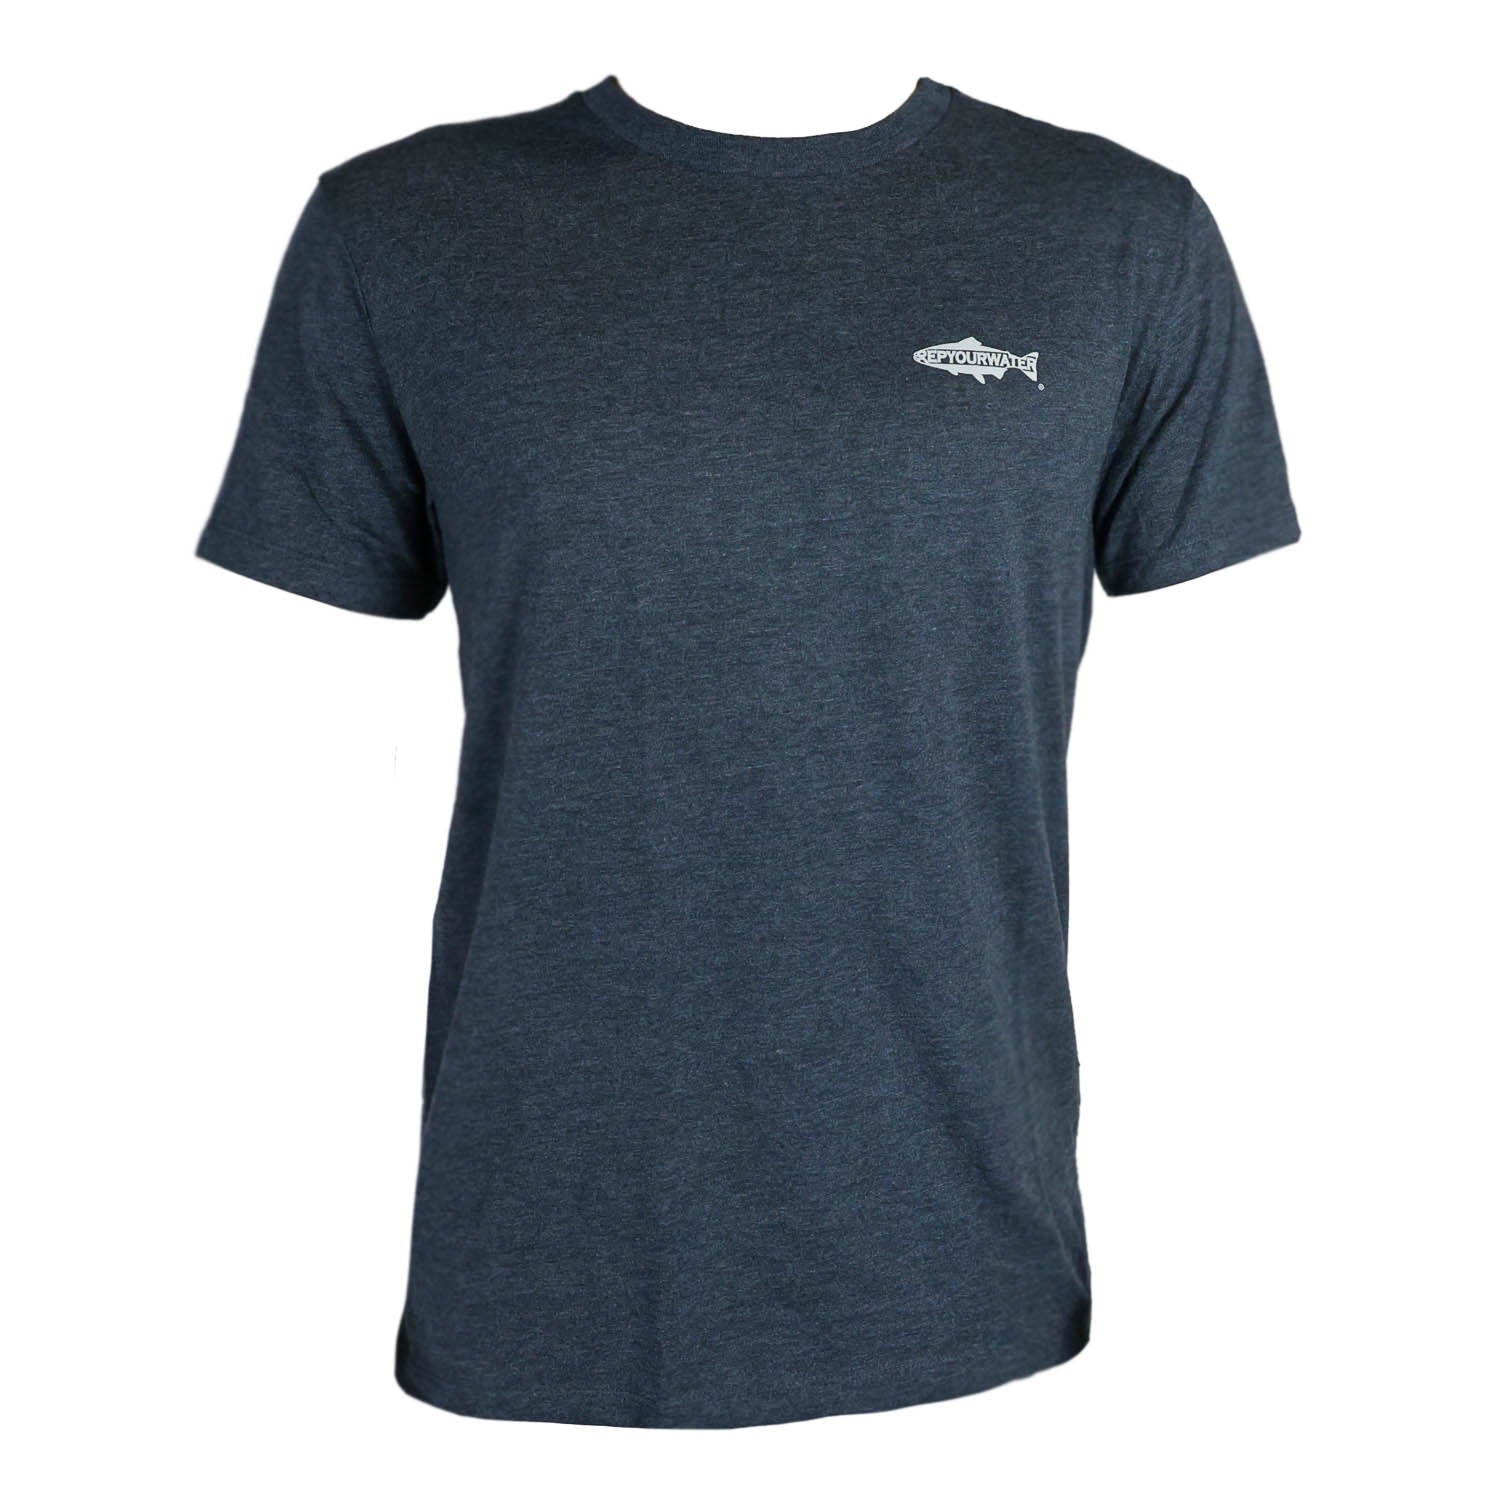 The front of a dark navy shirt with a fish silhouette that reads repyourwater in white